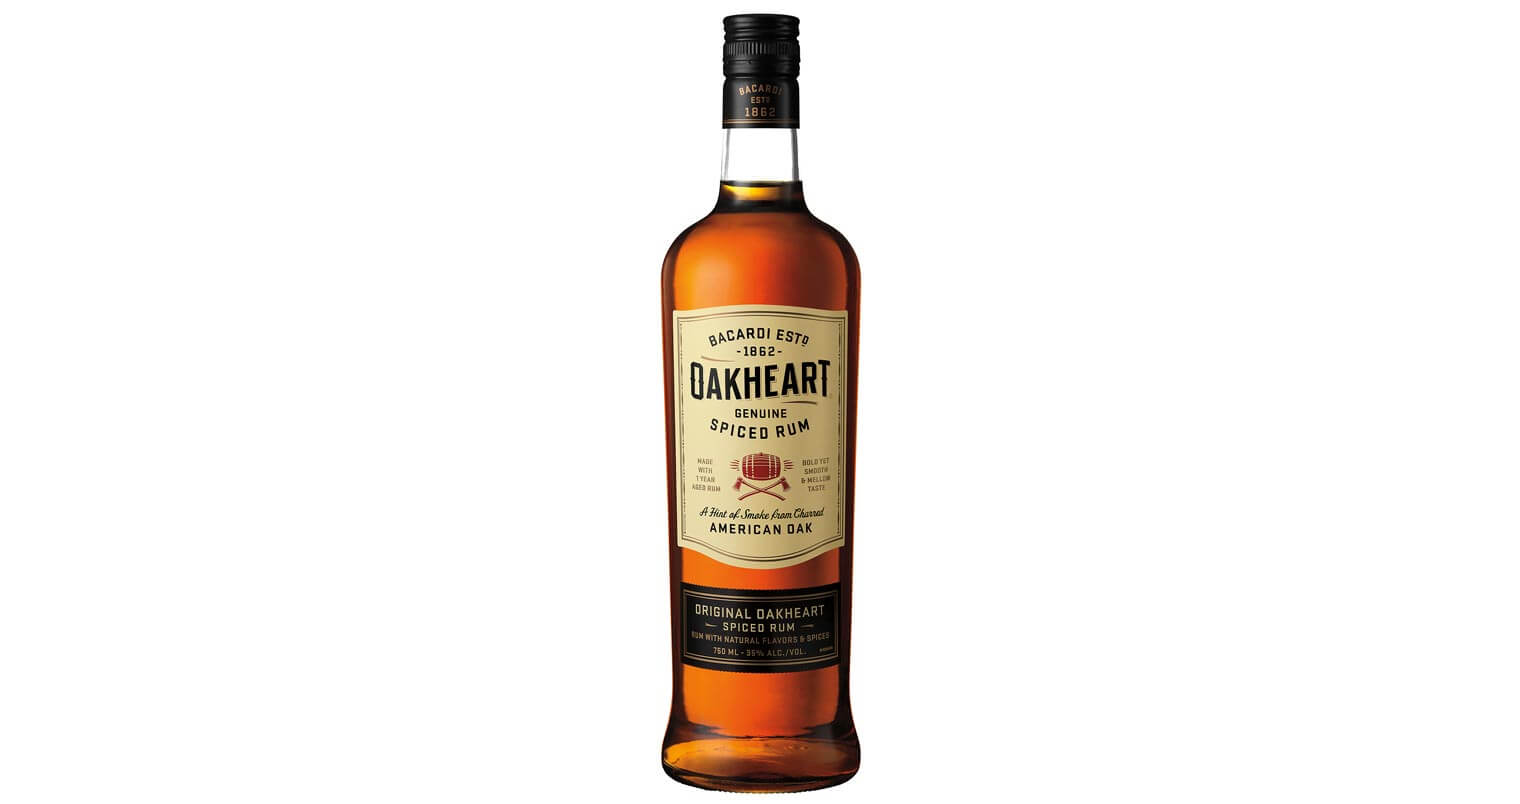 OAKHEART Genuine Spiced Rum Hits Shelves with New Signature Packaging, featured image